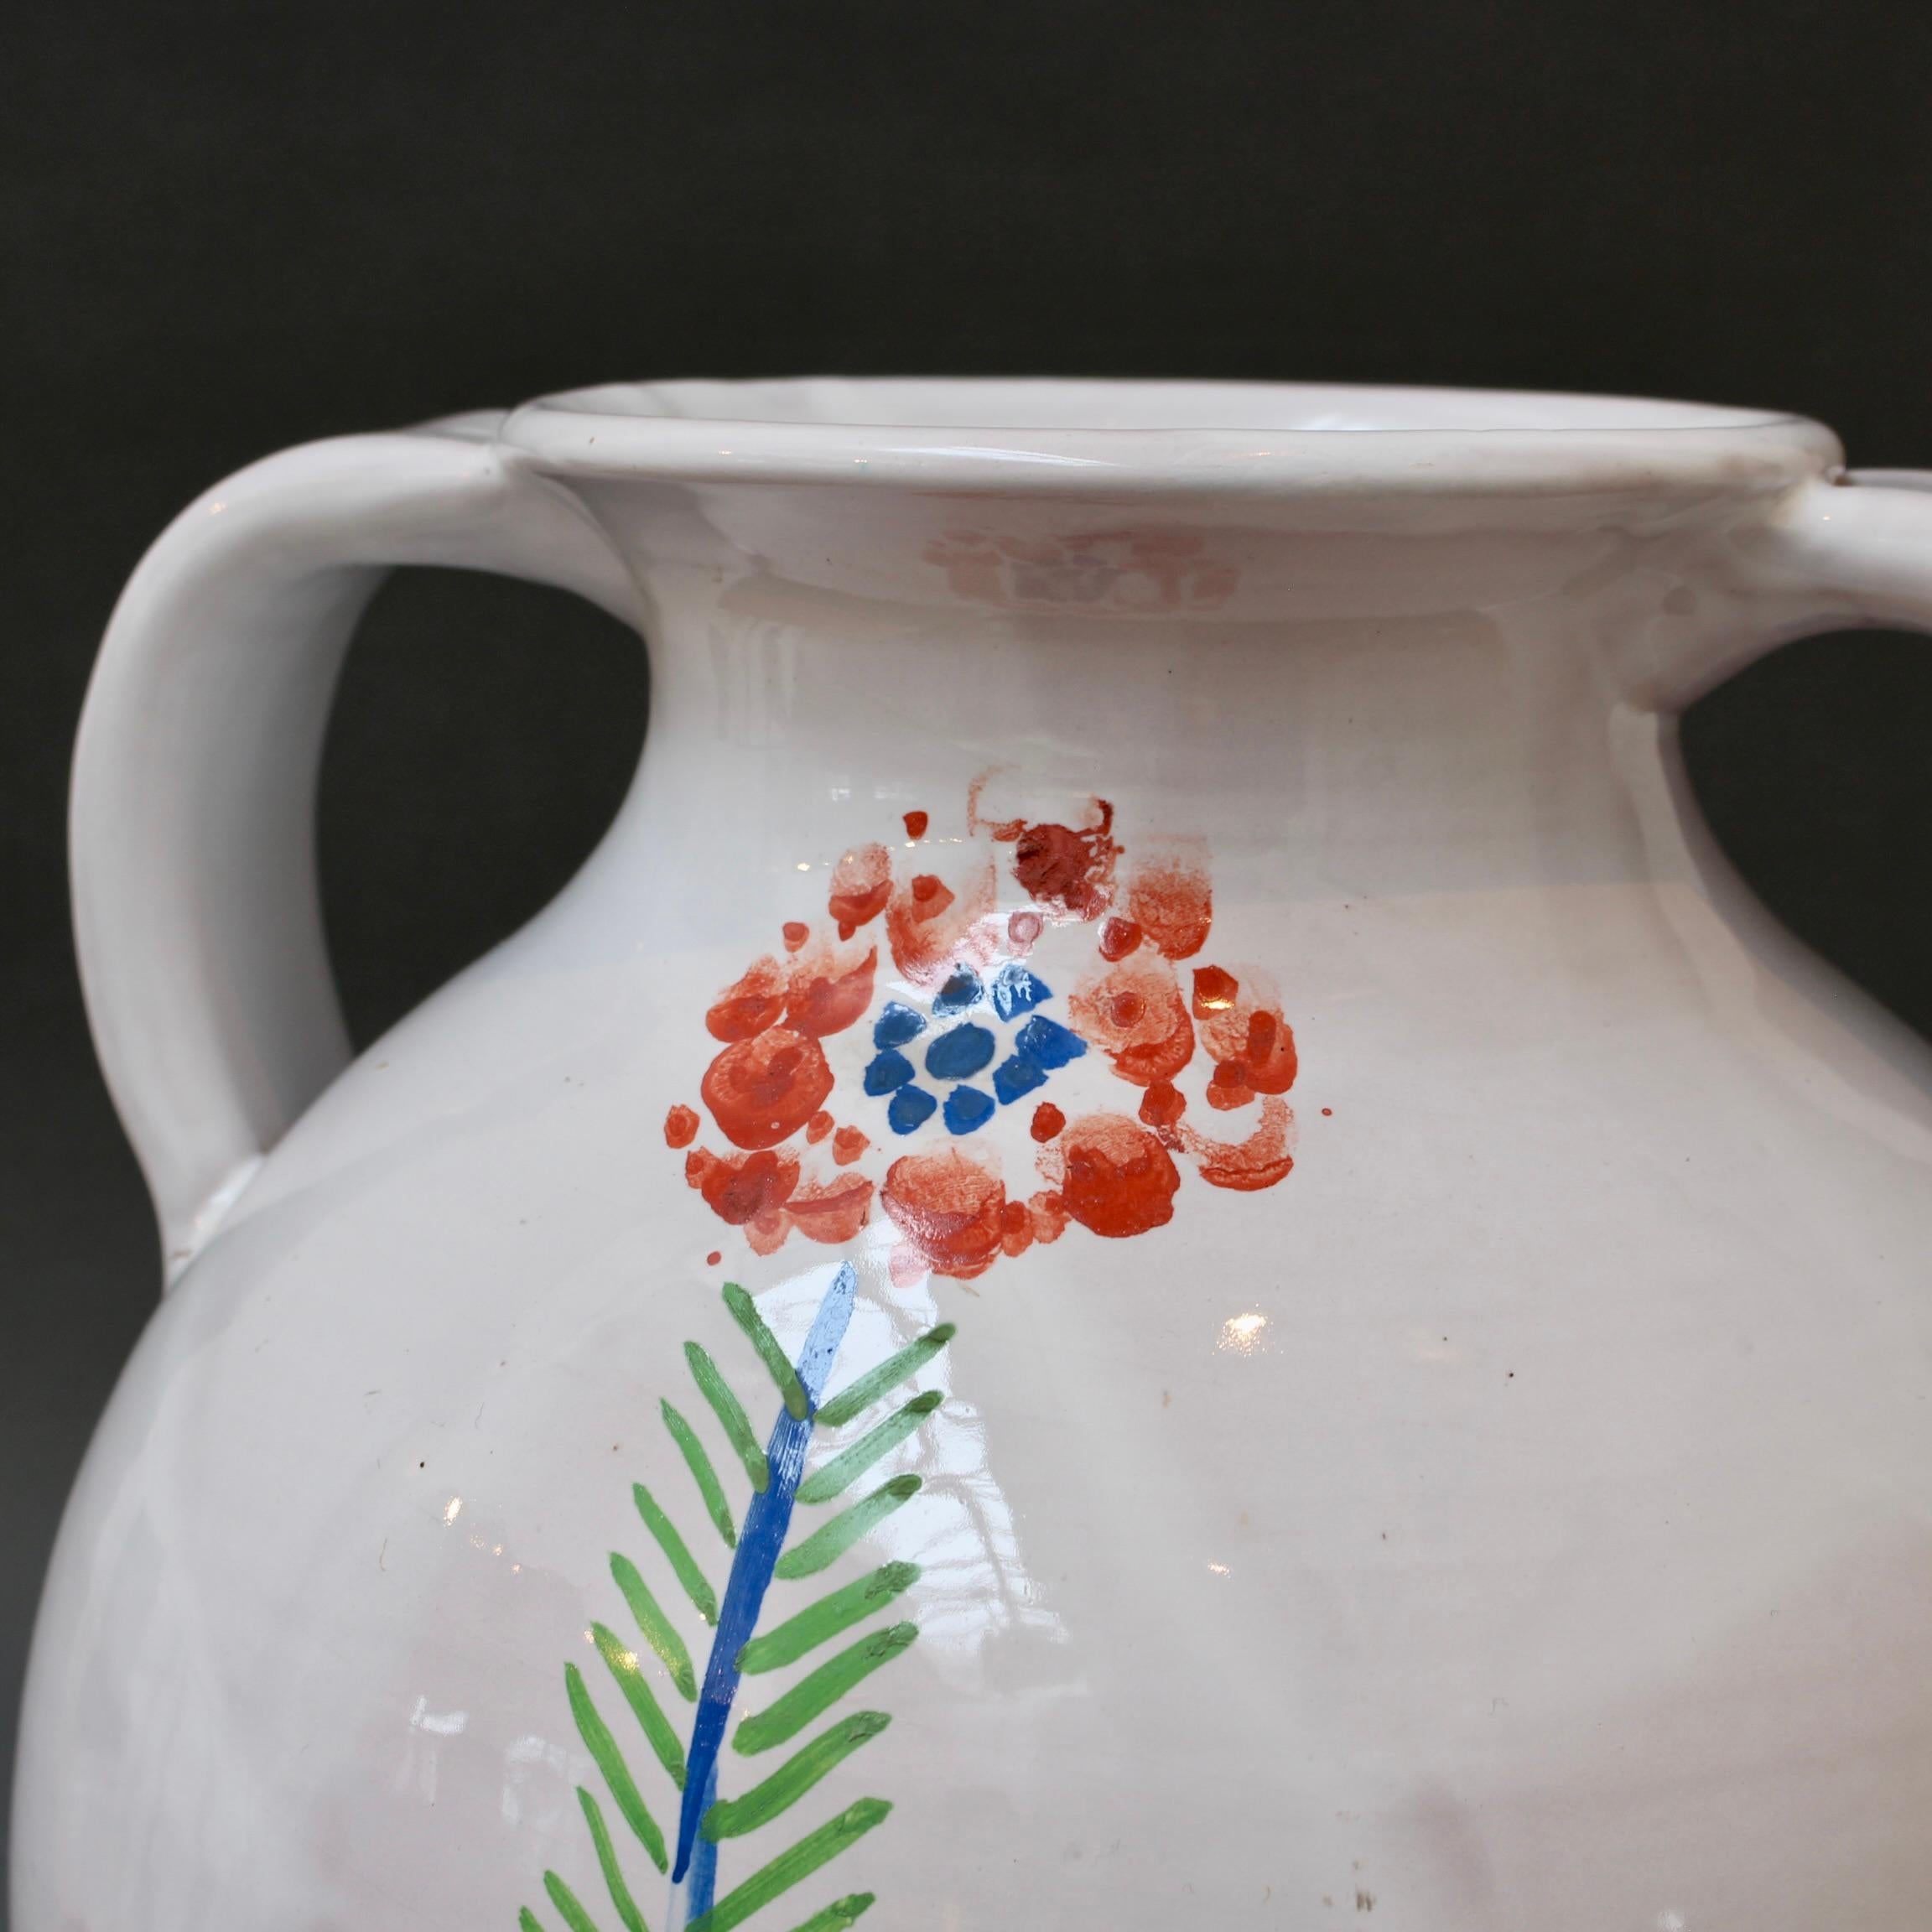 Vintage French Hand-Painted Ceramic Vase by Roger Capron (circa 1960s) For Sale 10